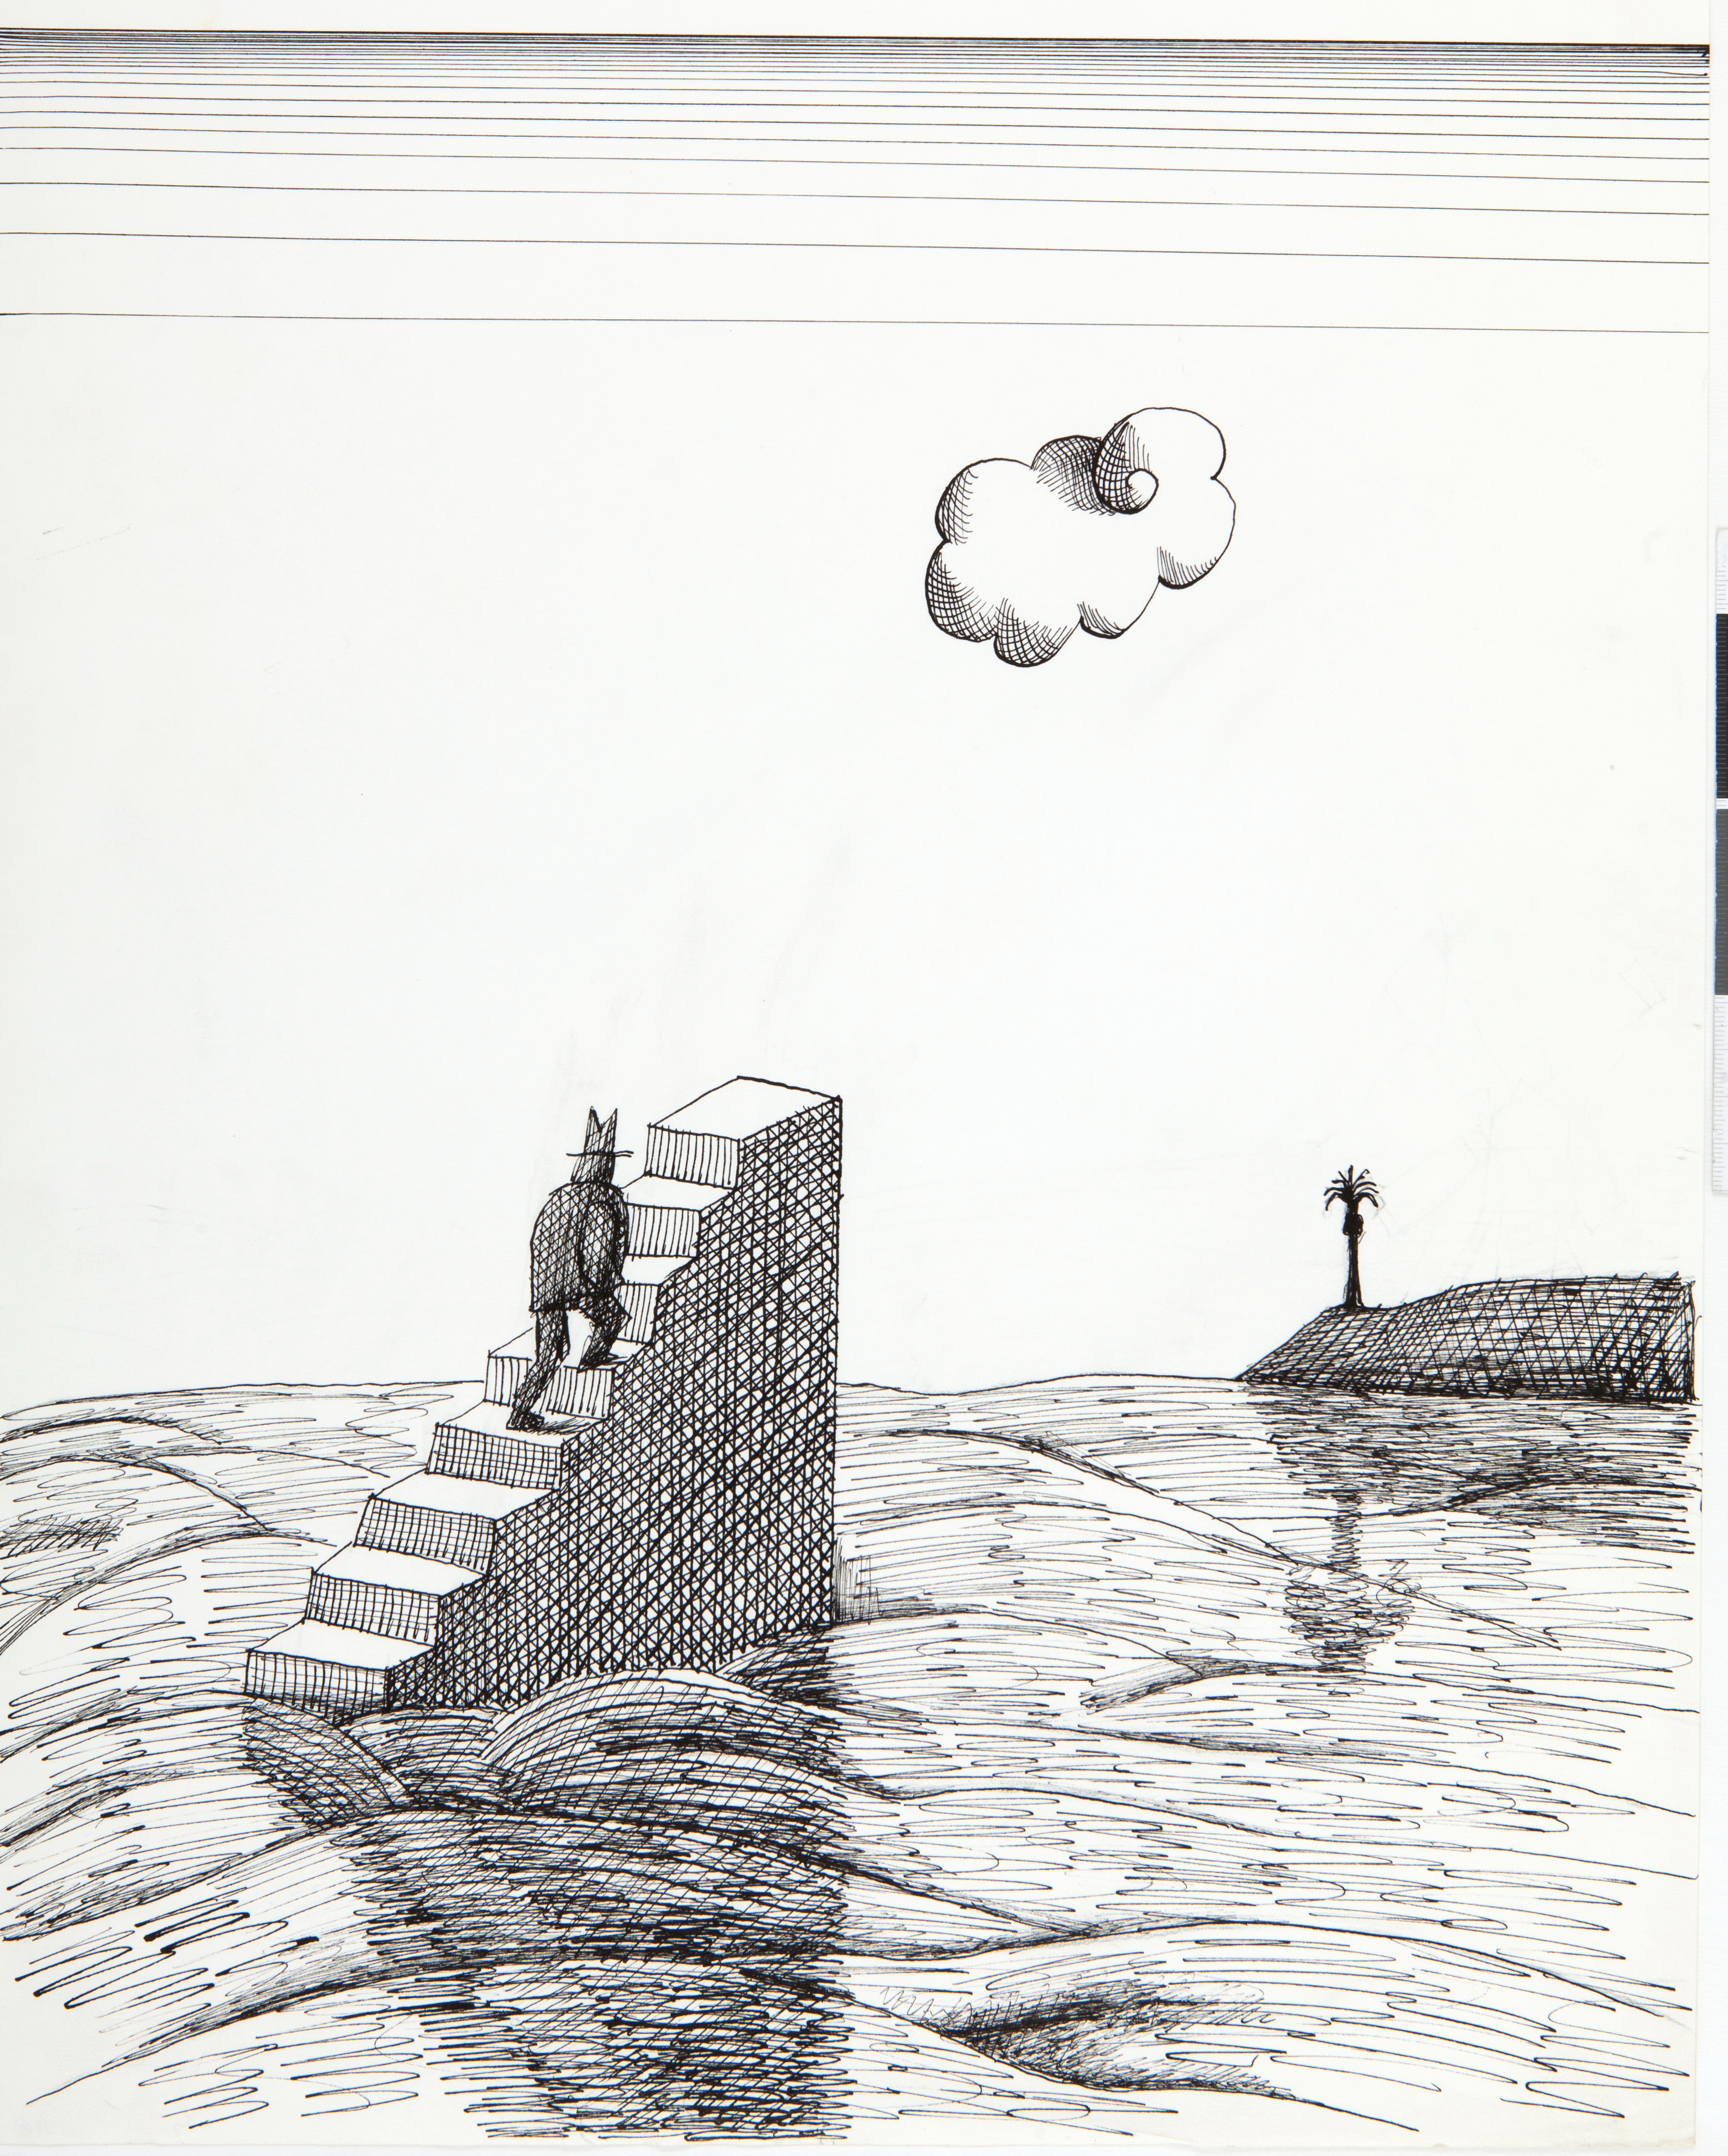 Untitled, 1965. Ink on paper, 27 7/8 x 4 3/8 in. The Saul Steinberg Foundation.